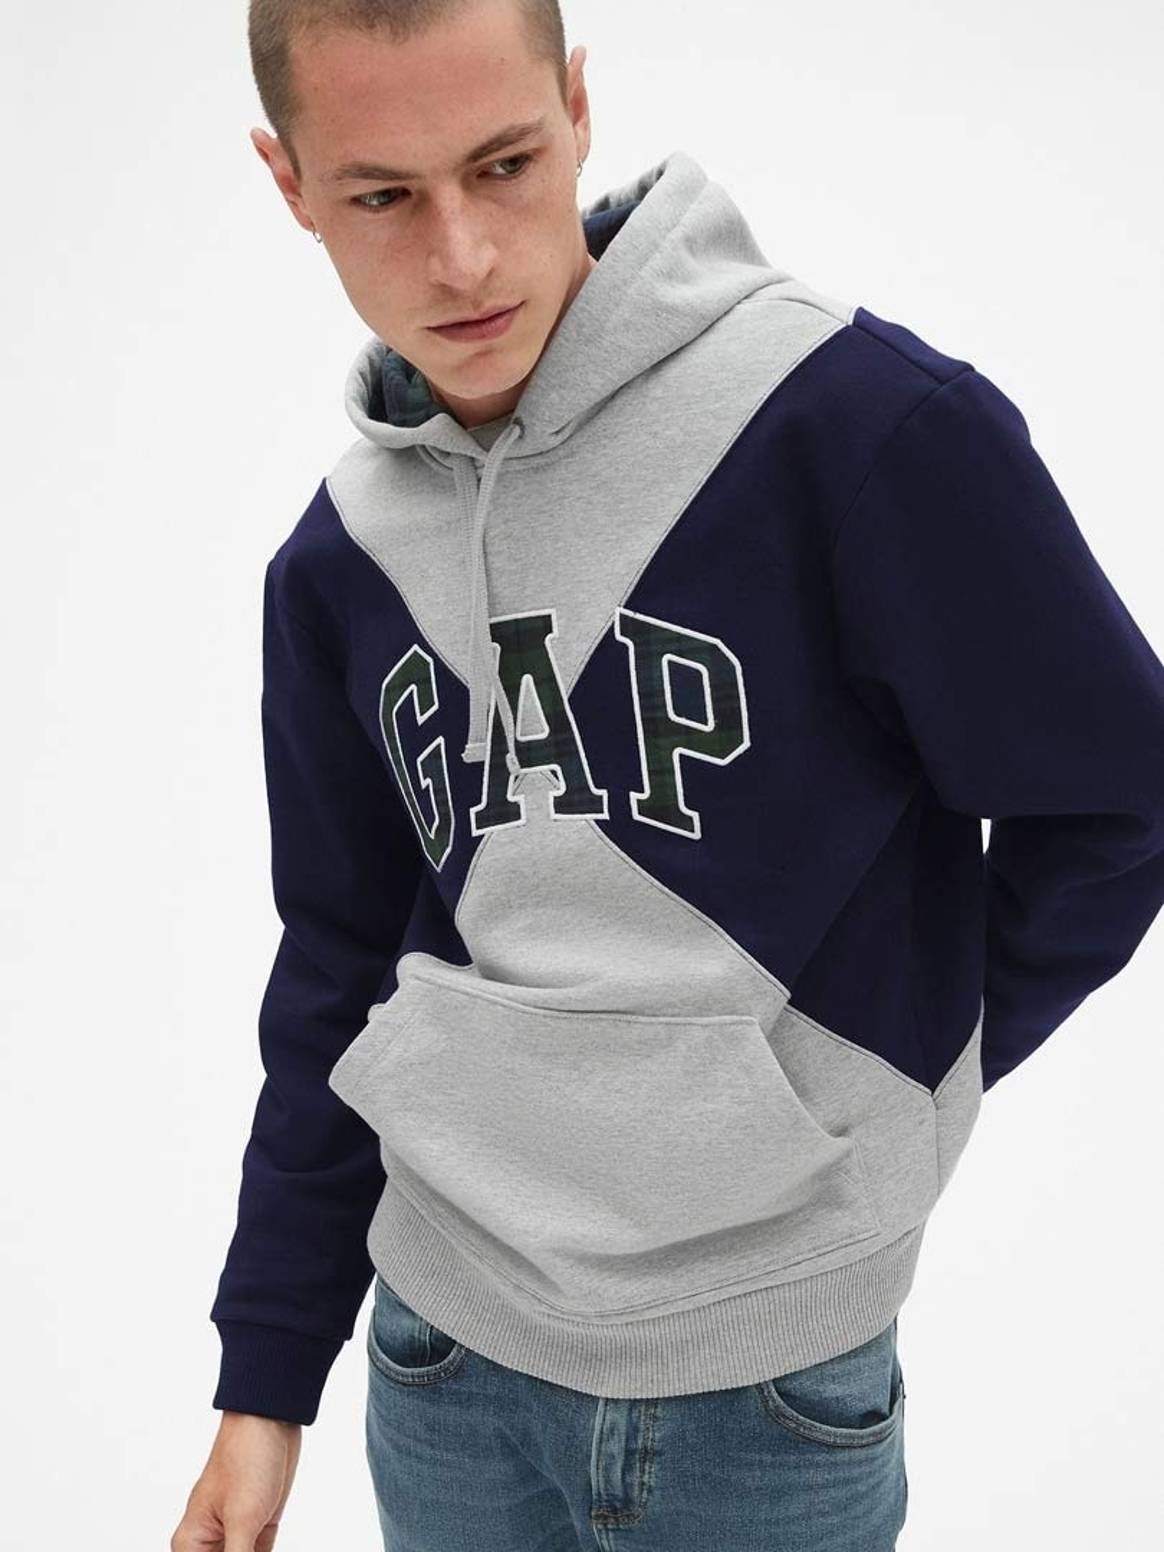 Gap launches designer collection with GQ